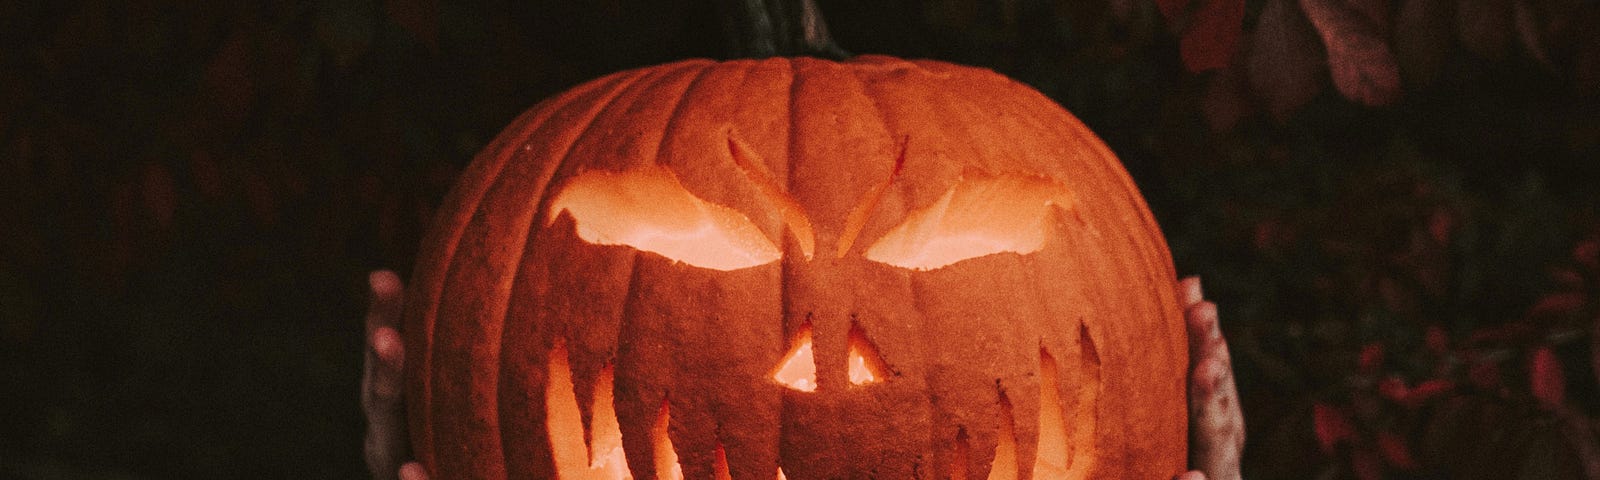 Man holding a jack o’lantern in front of his face